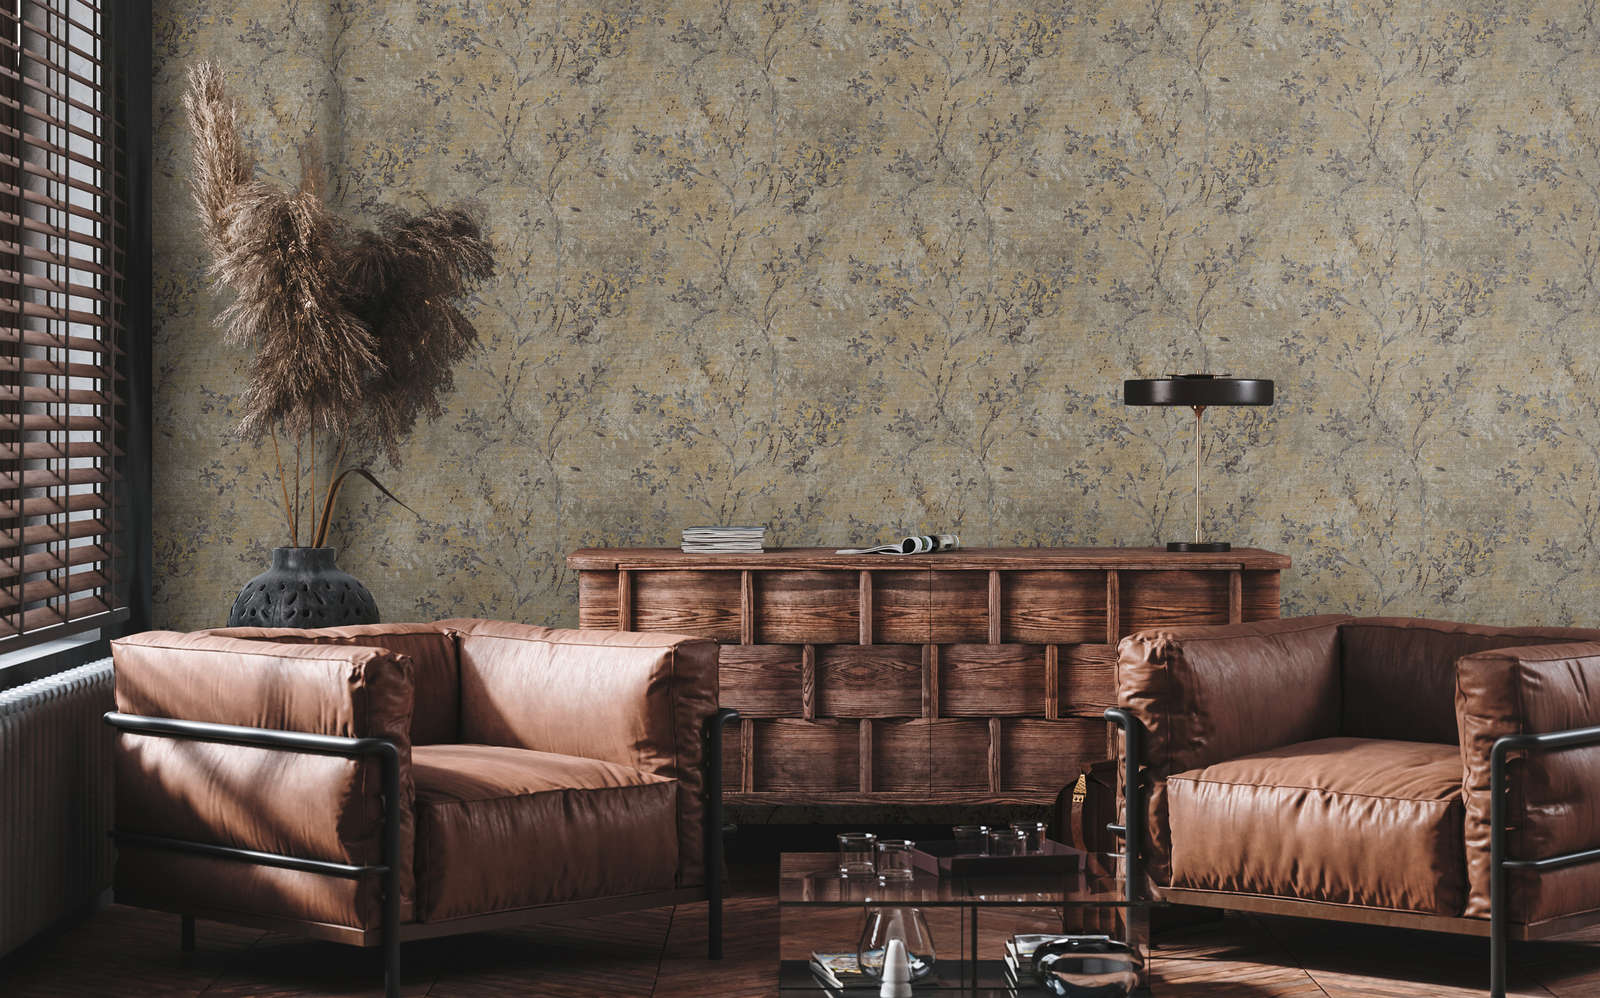             Non-woven wallpaper with floral pattern in watercolour look - brown, grey, gold
        